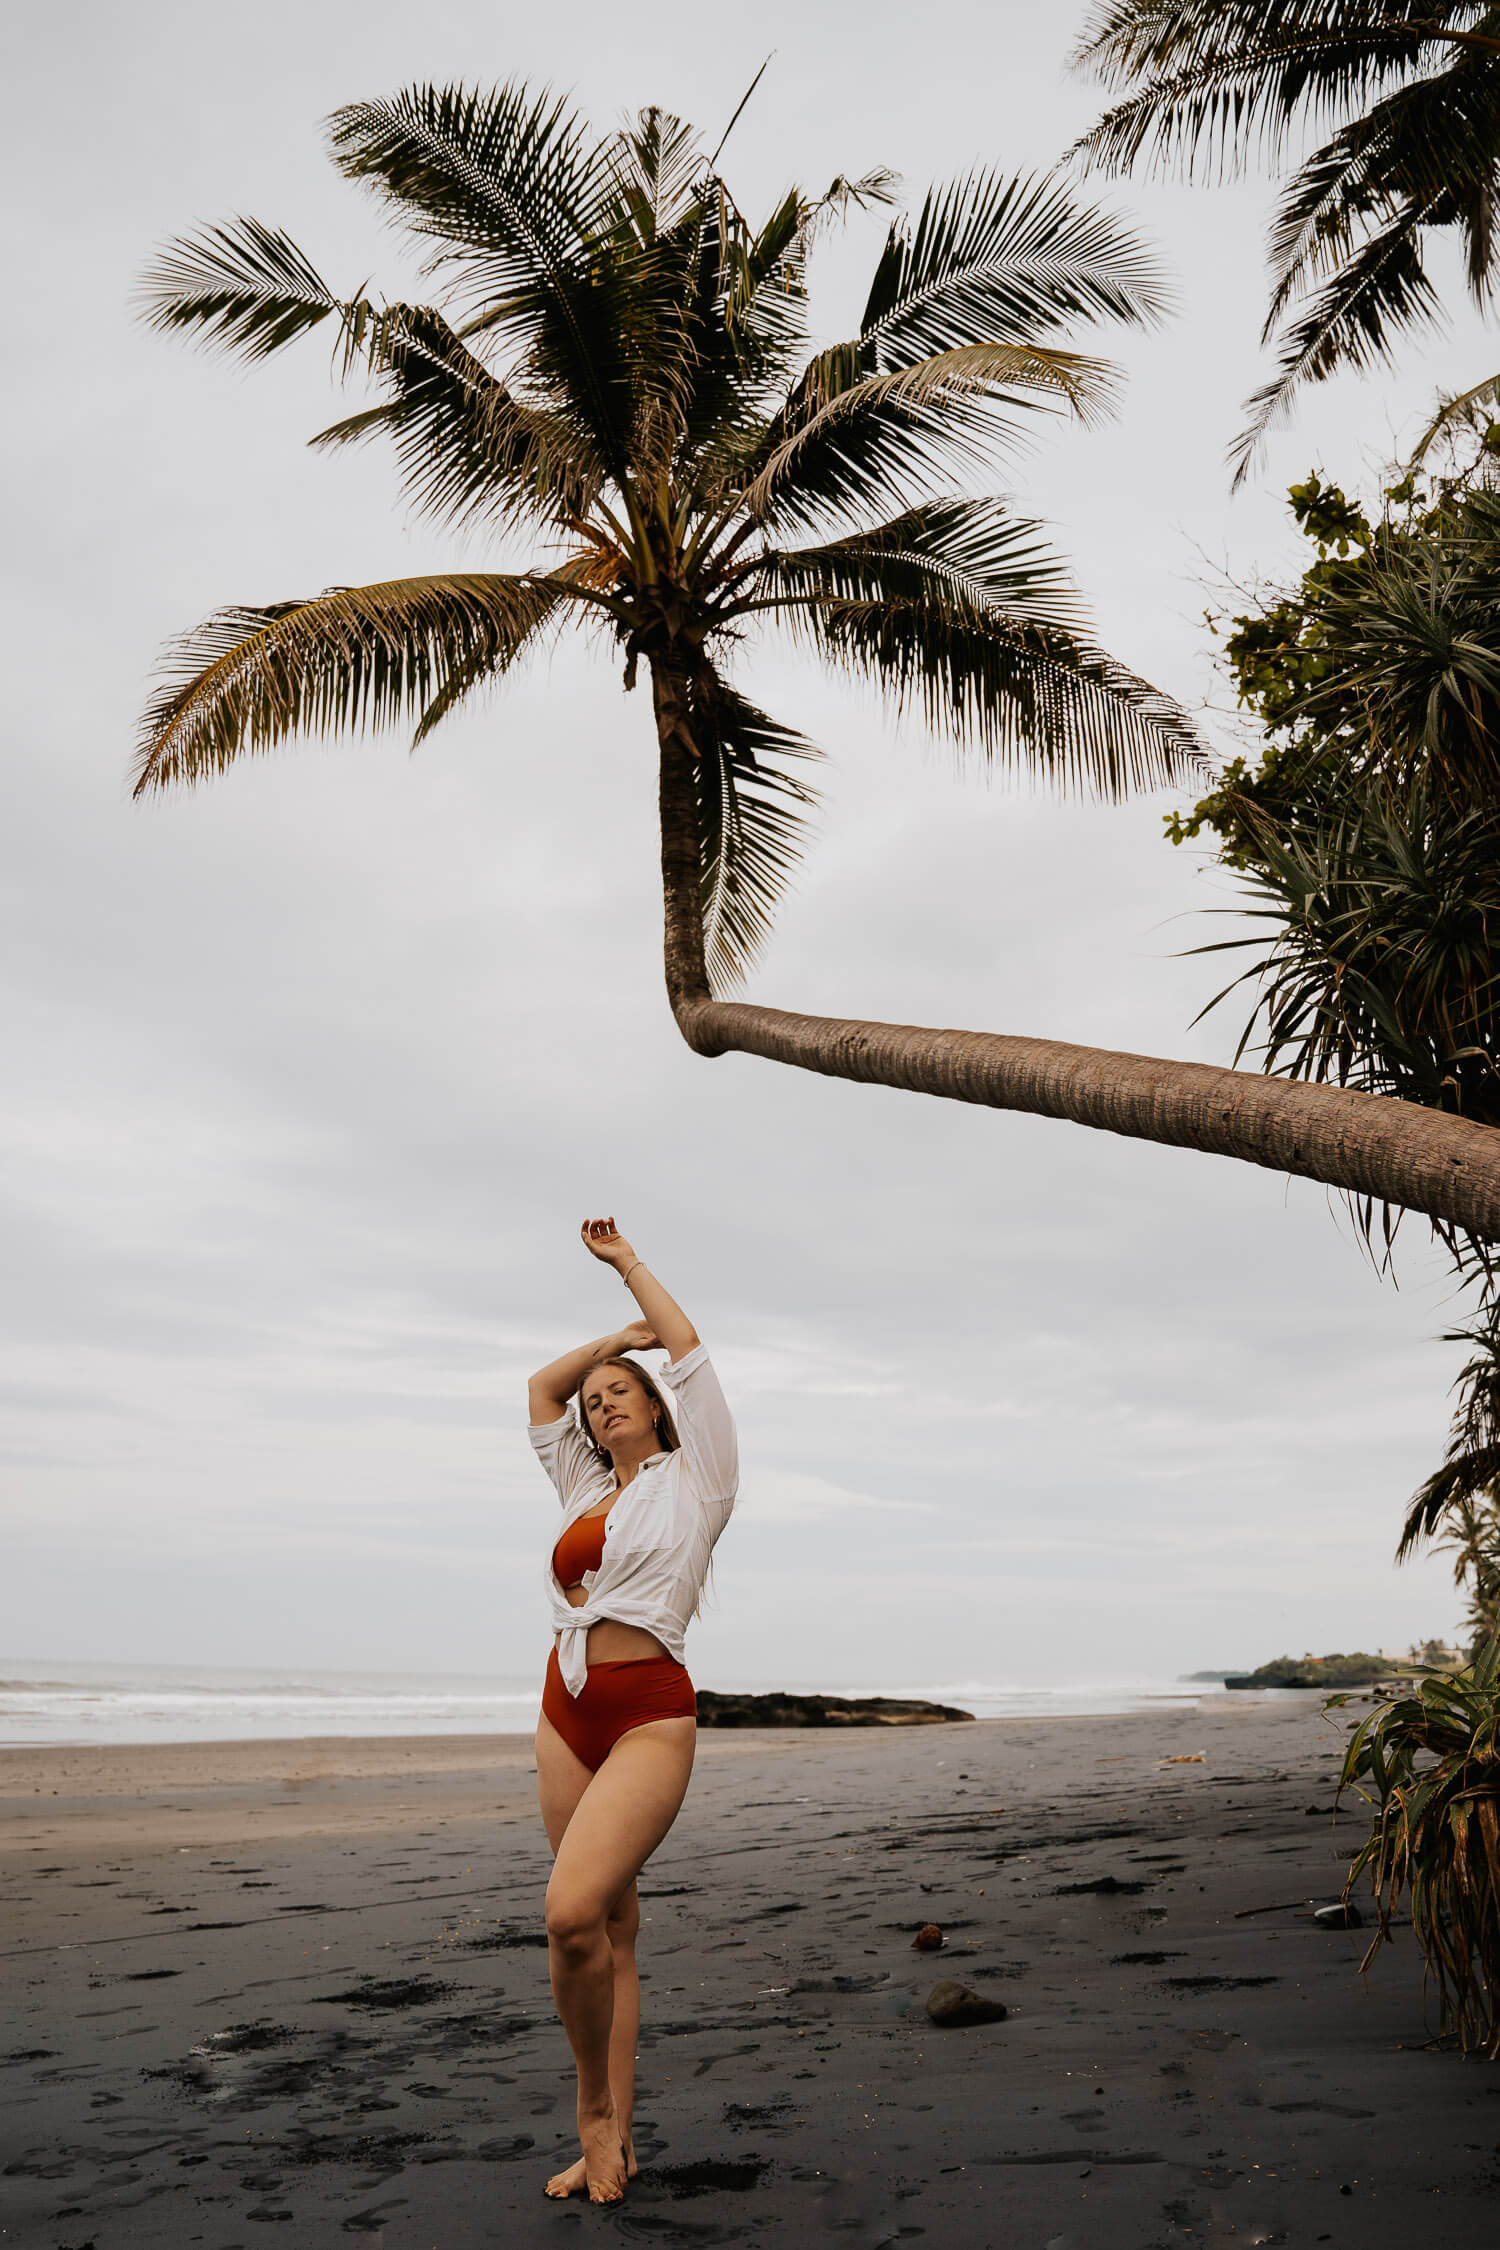 Pasut Beach Most instagrammable places in Bali